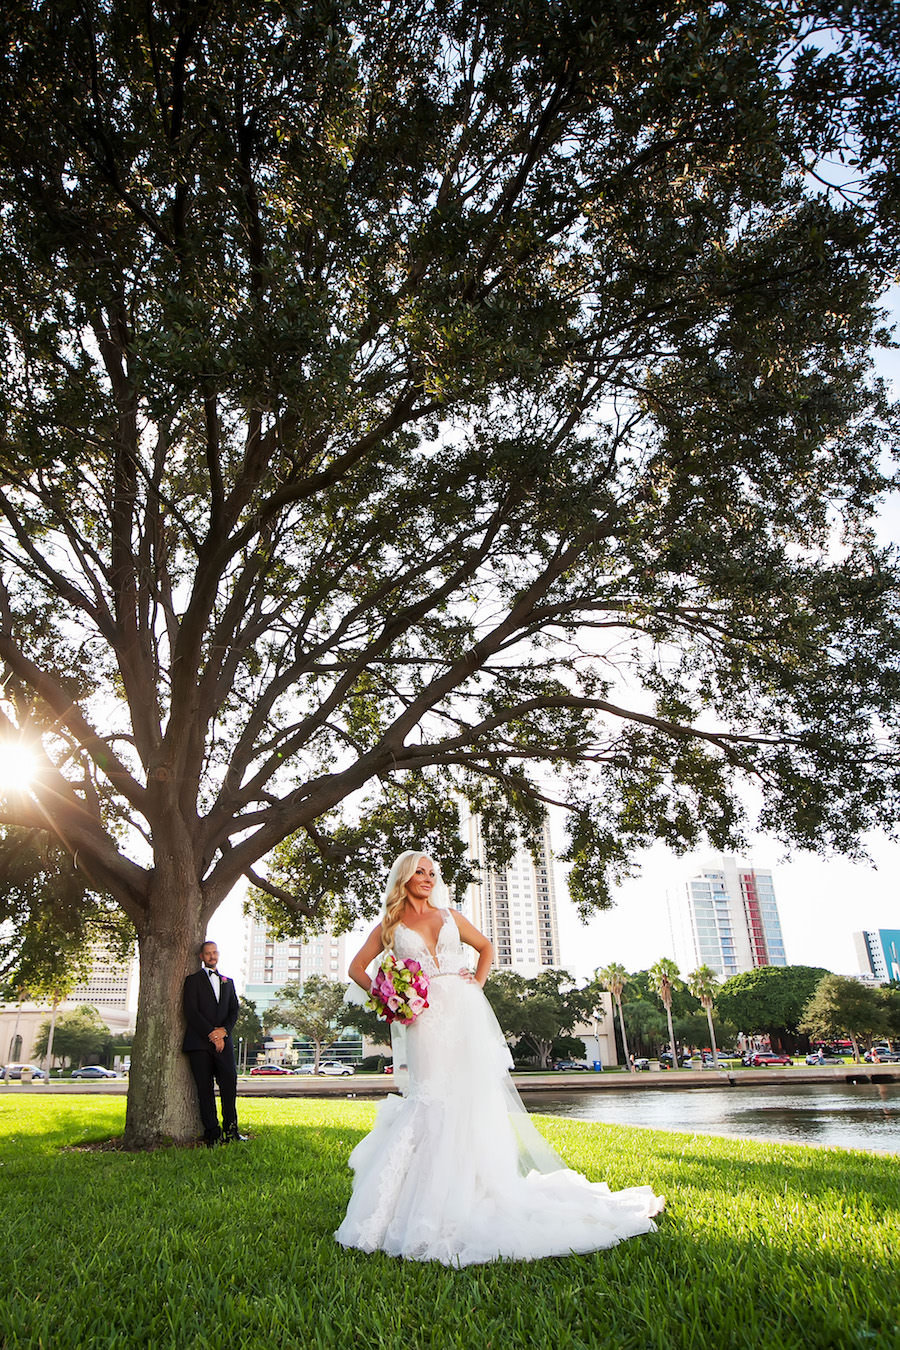 Bridal Wedding Portrait with Pnina Tornai Wedding Dress and Pink and Green Wedding Bouquet | Downtown St. Pete Wedding Photographer Limelight Photography